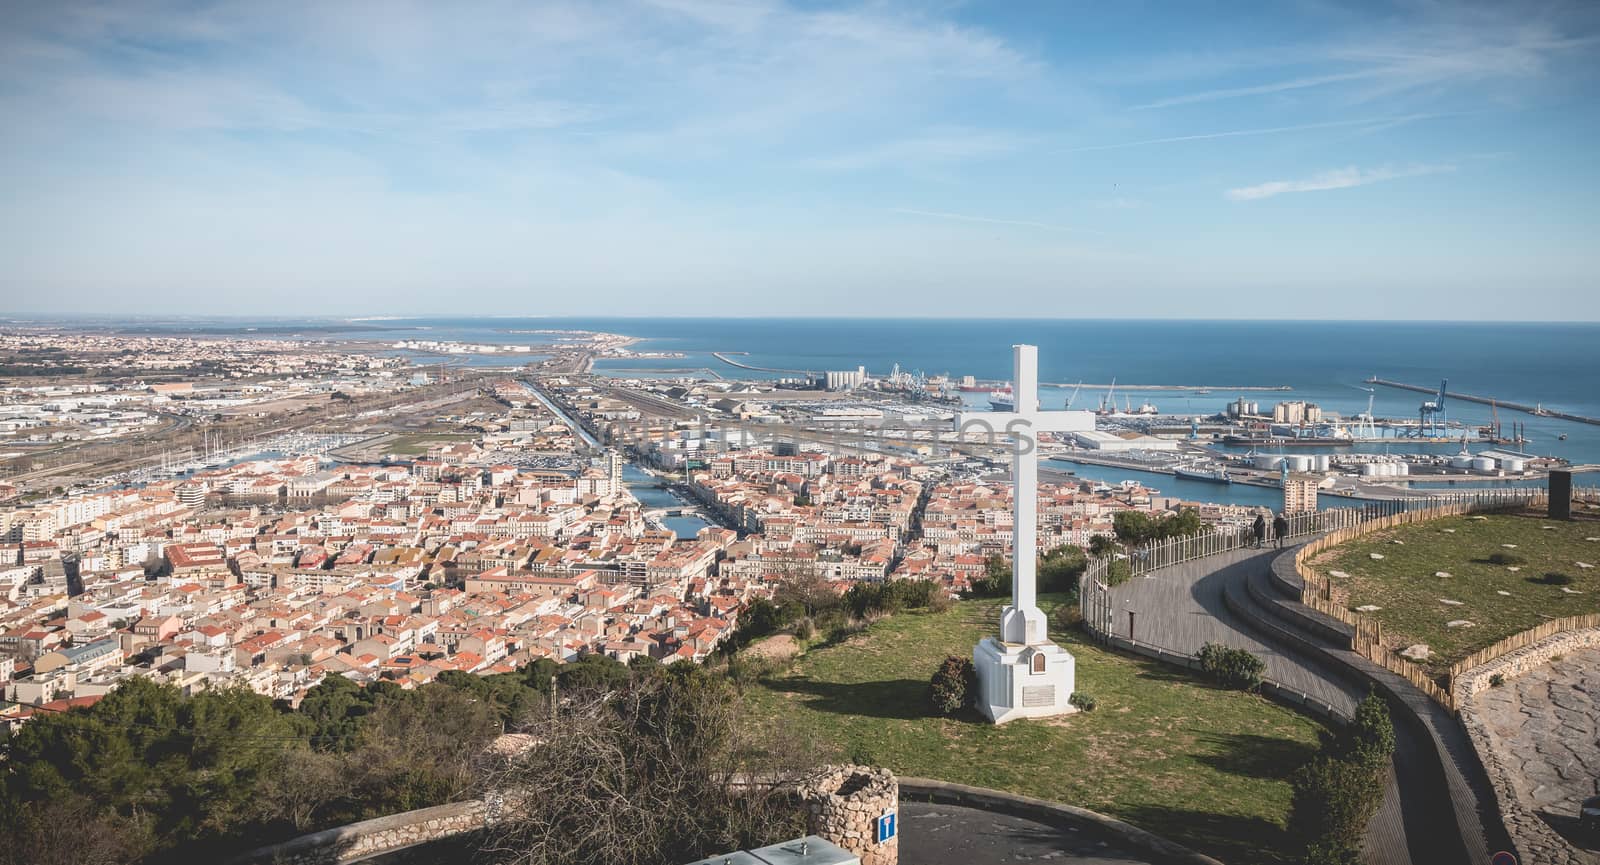 Sete, France - January 4, 2019: Architectural detail of the cross of Mont Saint Clair overlooking the town of Sete on a winter day